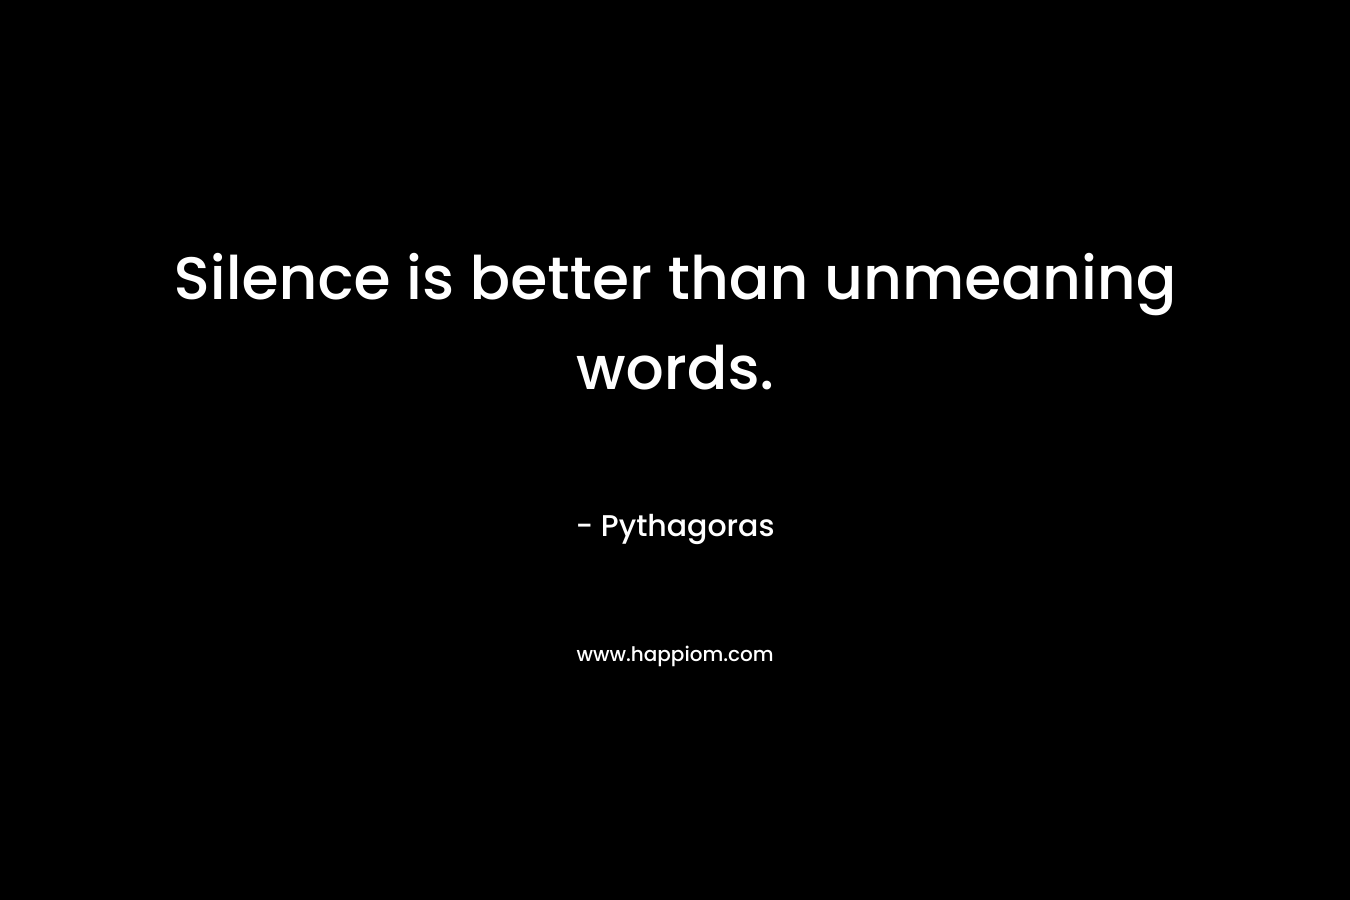 Silence is better than unmeaning words. – Pythagoras